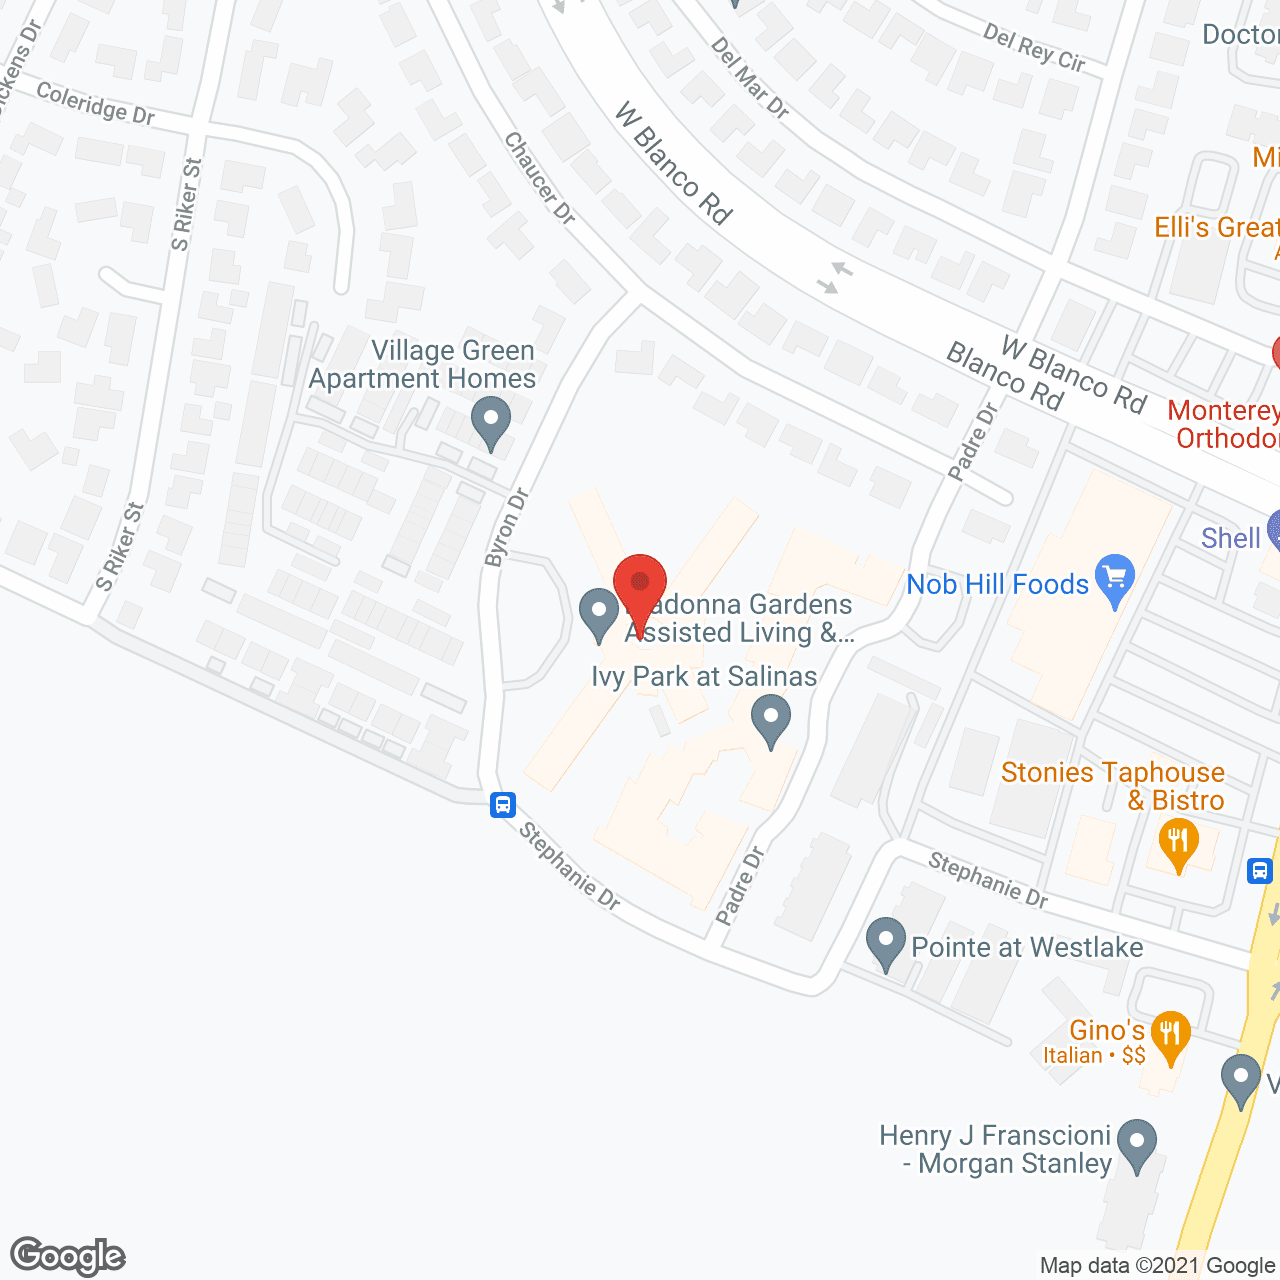 Madonna Gardens Assisted Living and Memory Care in google map